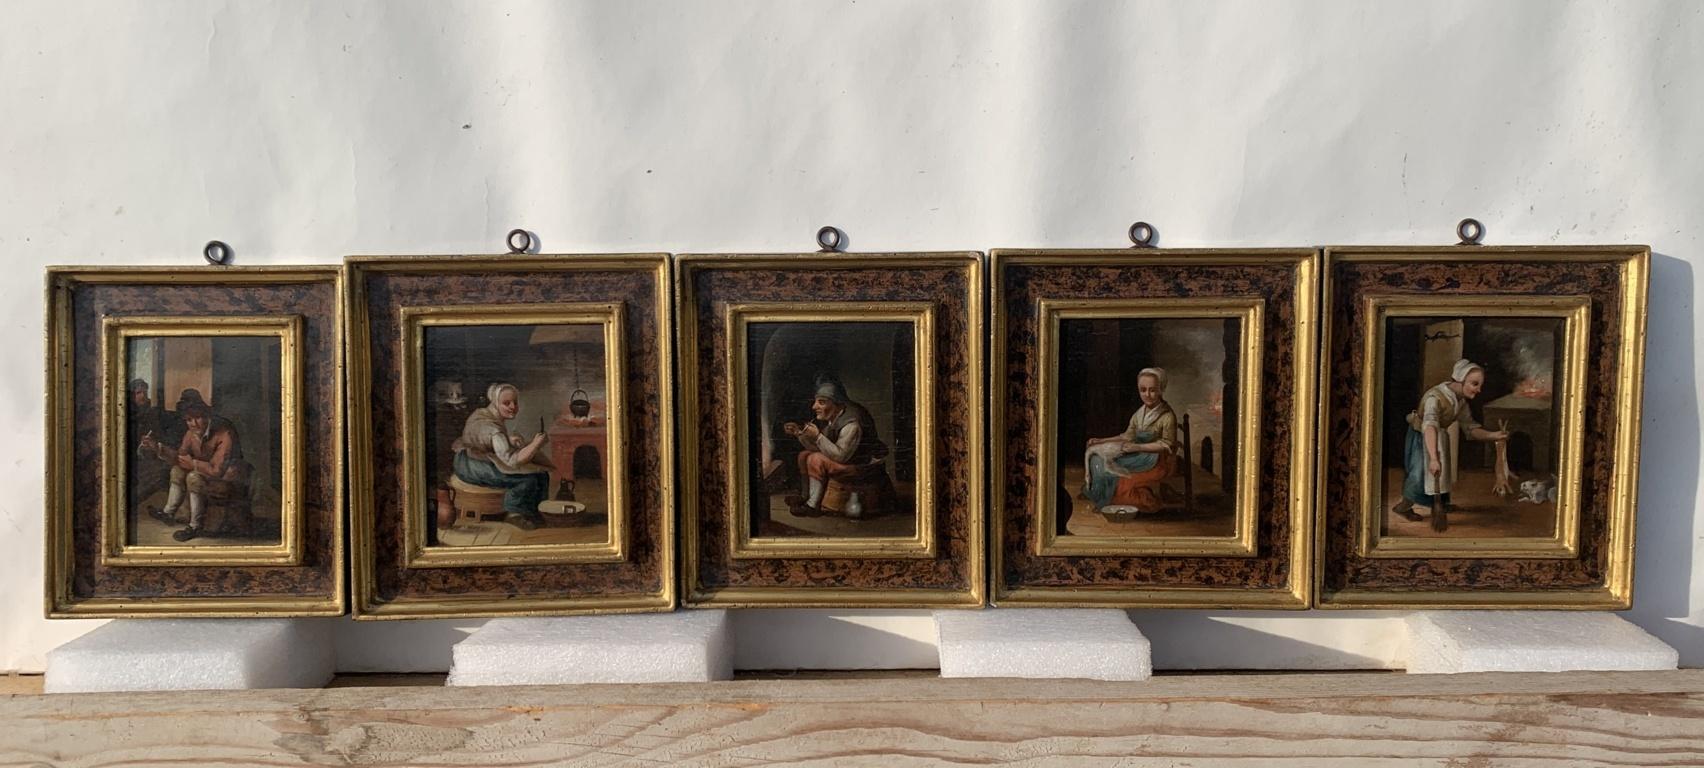 Set of Five 18th century Dutch figure paintings - Interiors scenes - Signed - Painting by Unknown